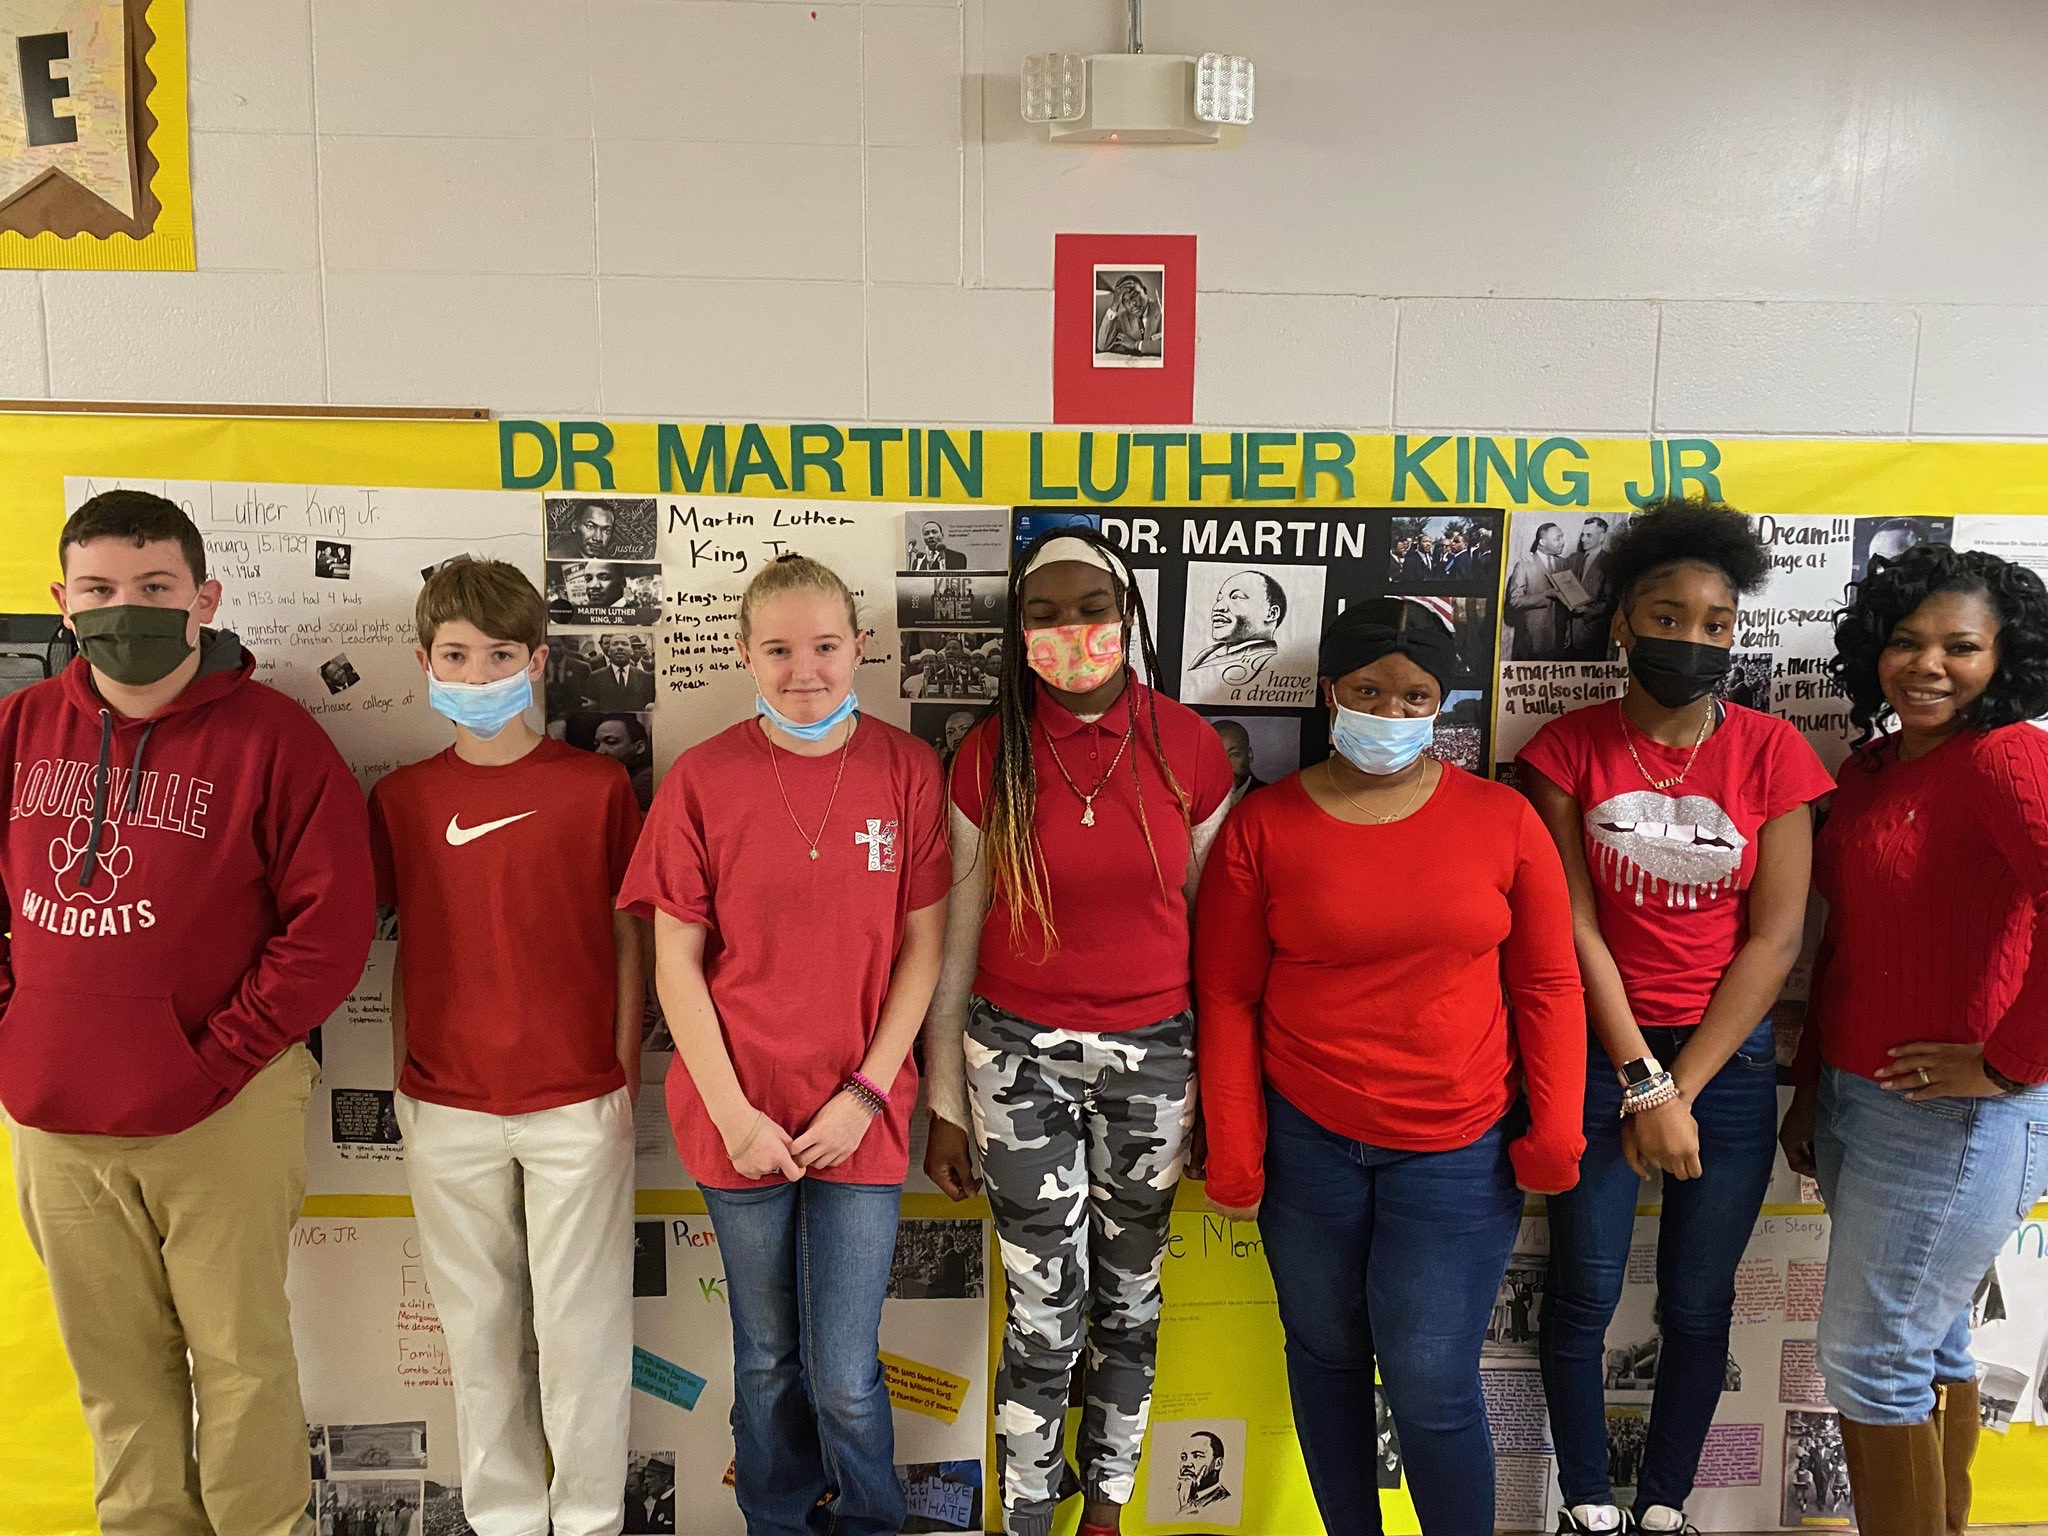 American Heart Month at EMS